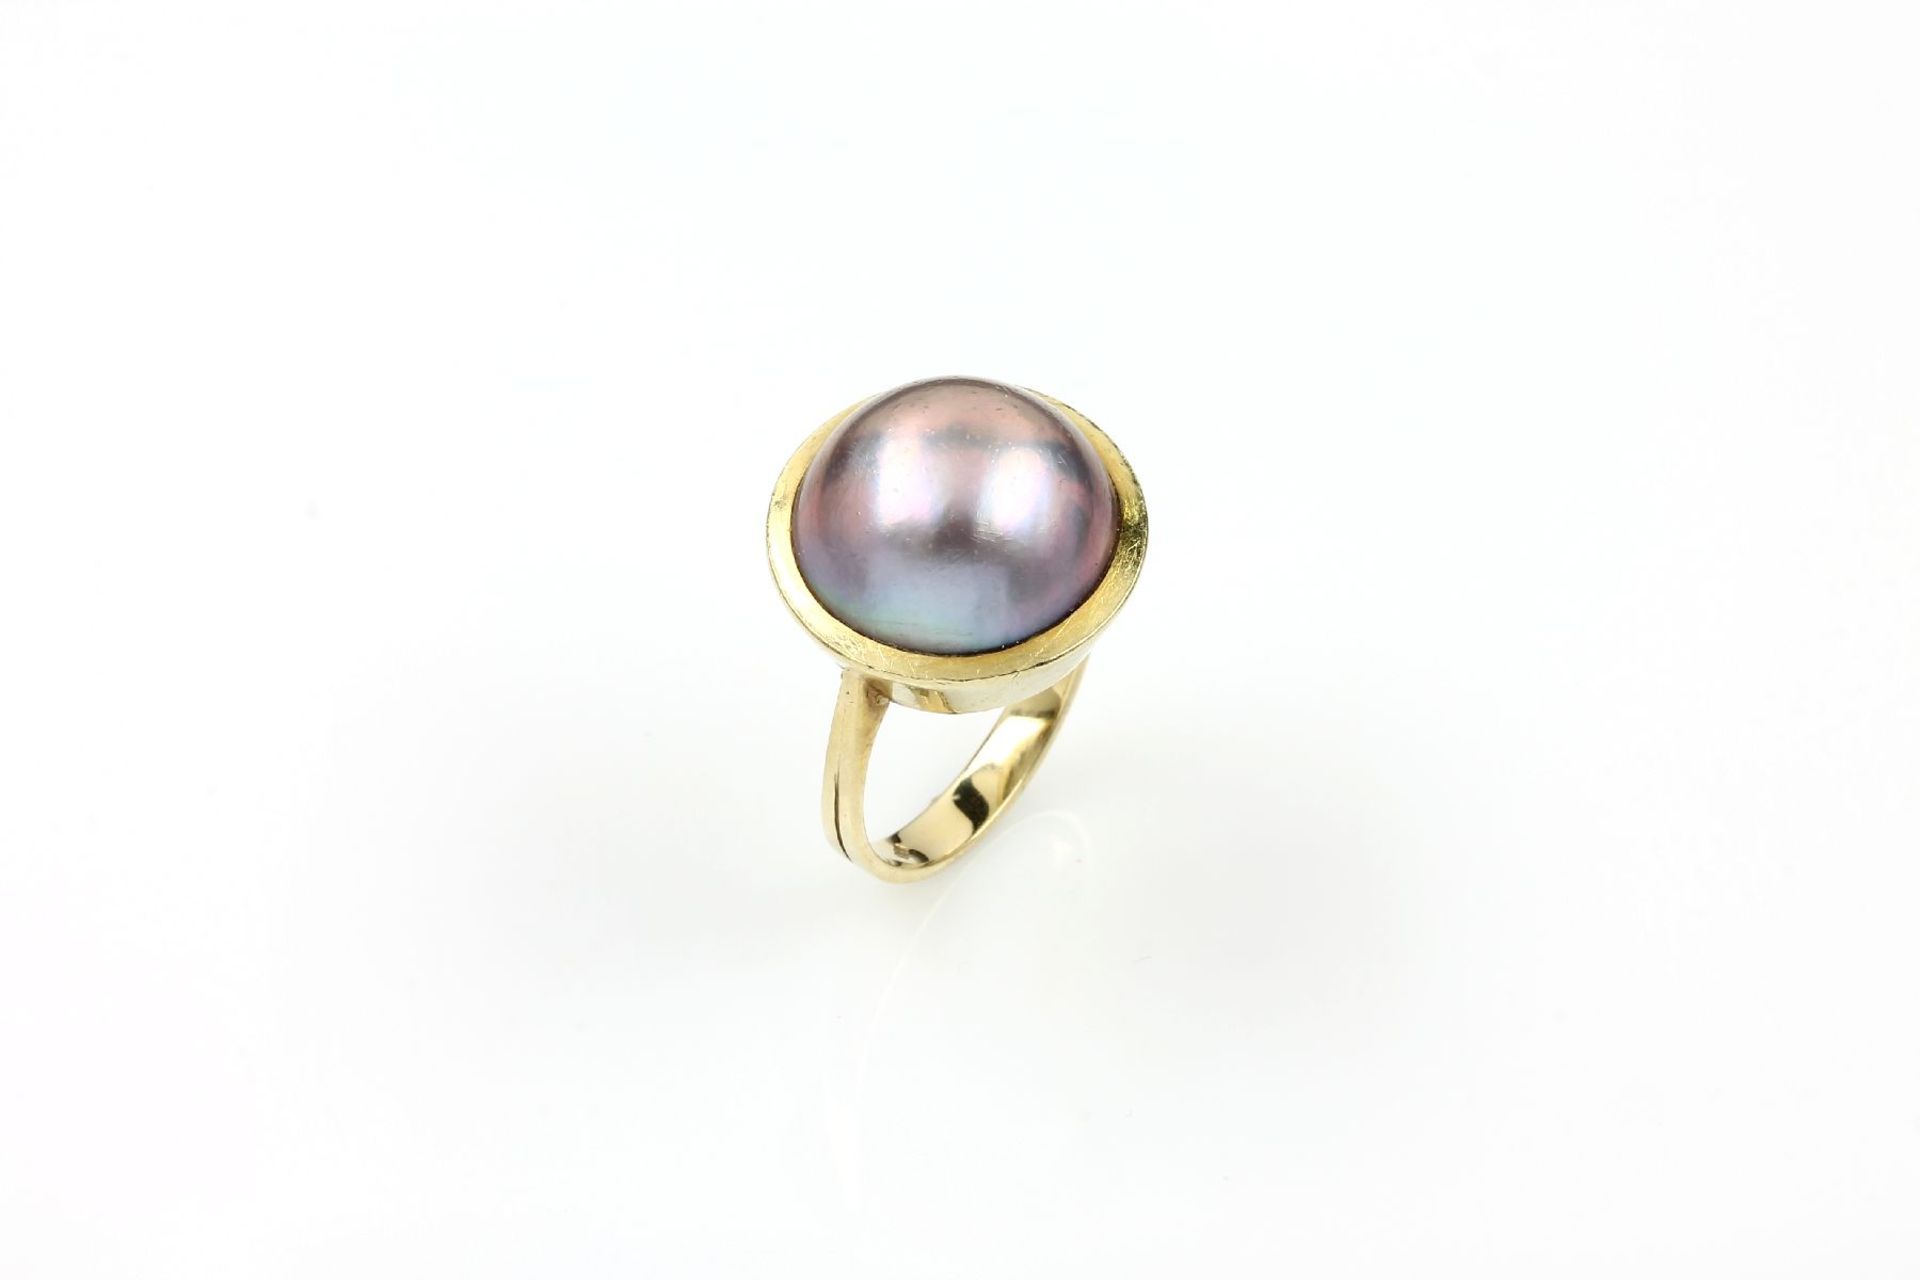 14 kt gold ring with mabepearl , YG 585/000,mabepearl rose-purple coloured, diam. approx. 16 mm,